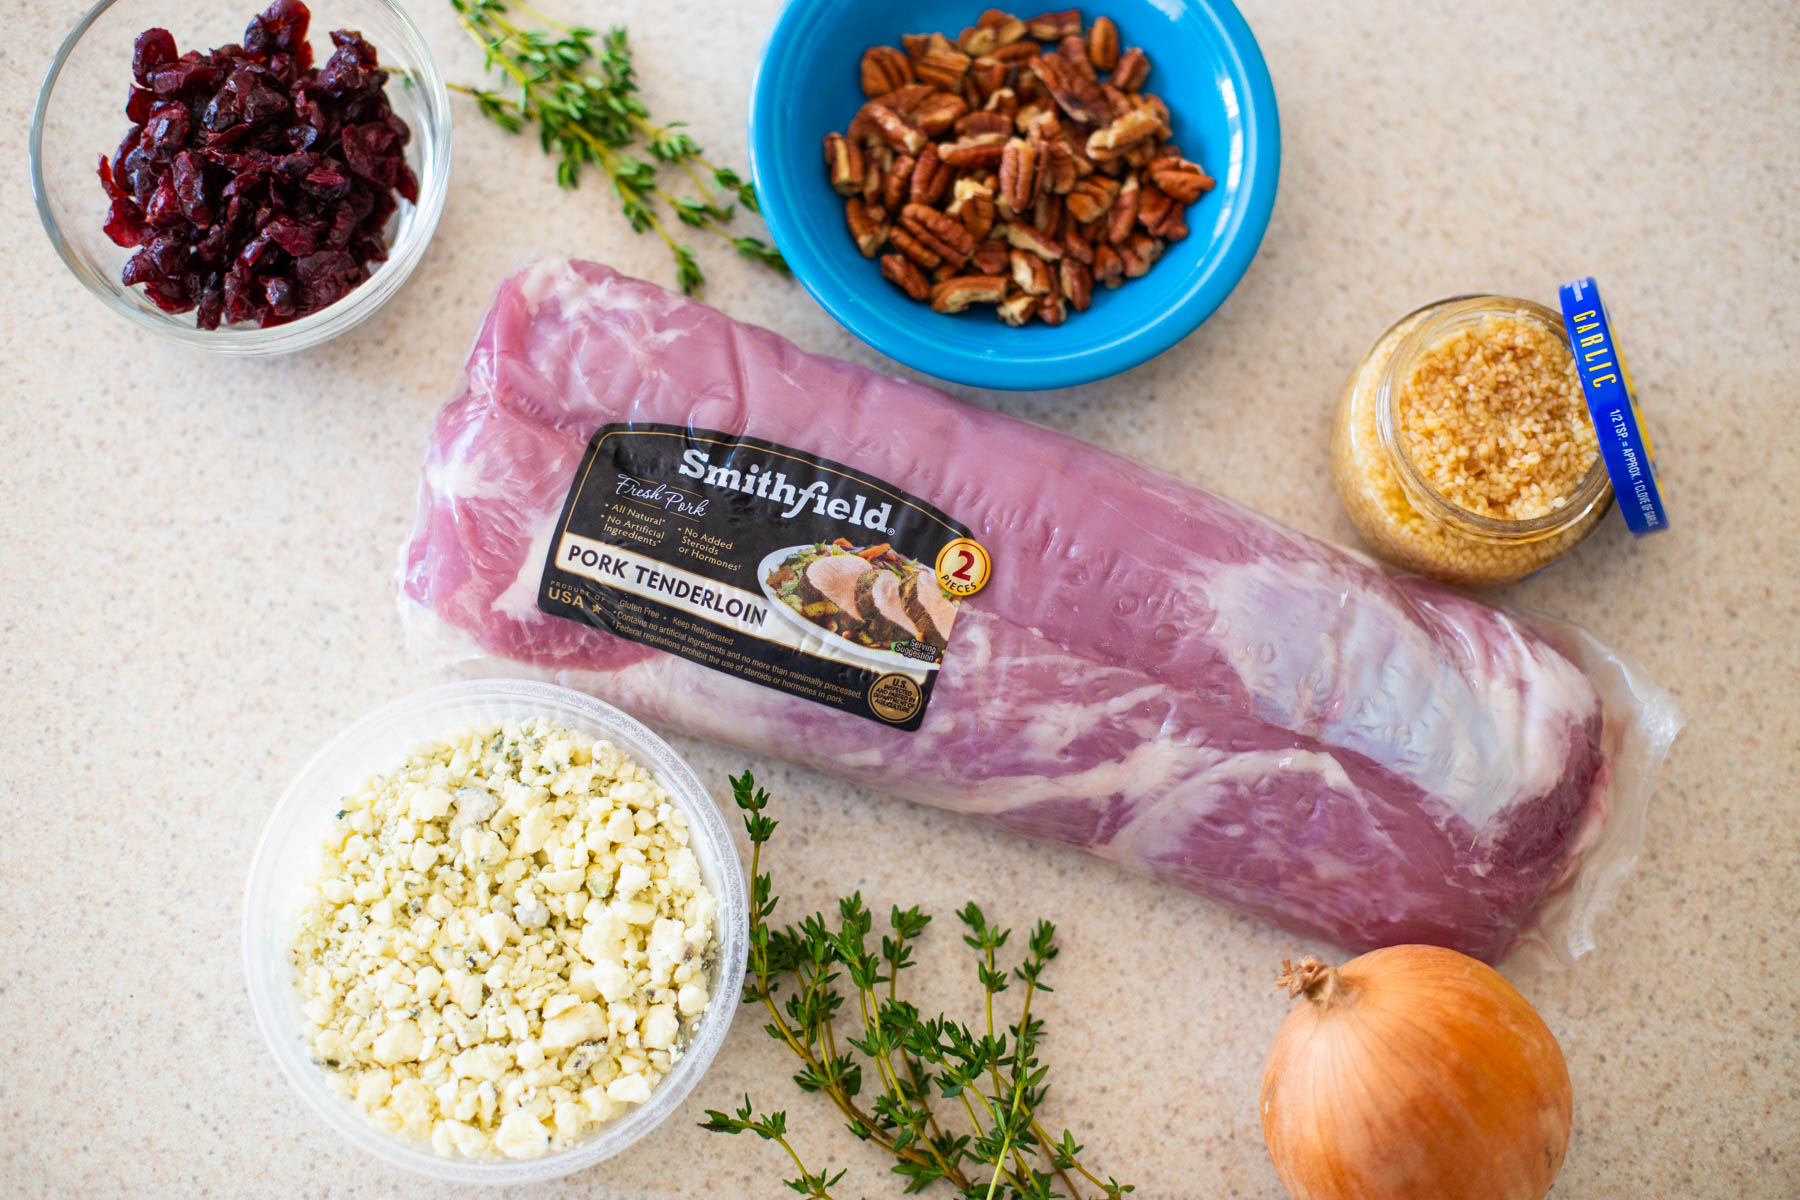 The ingredients to make the blue cheese stuffed pork tenderloin are on the counter.